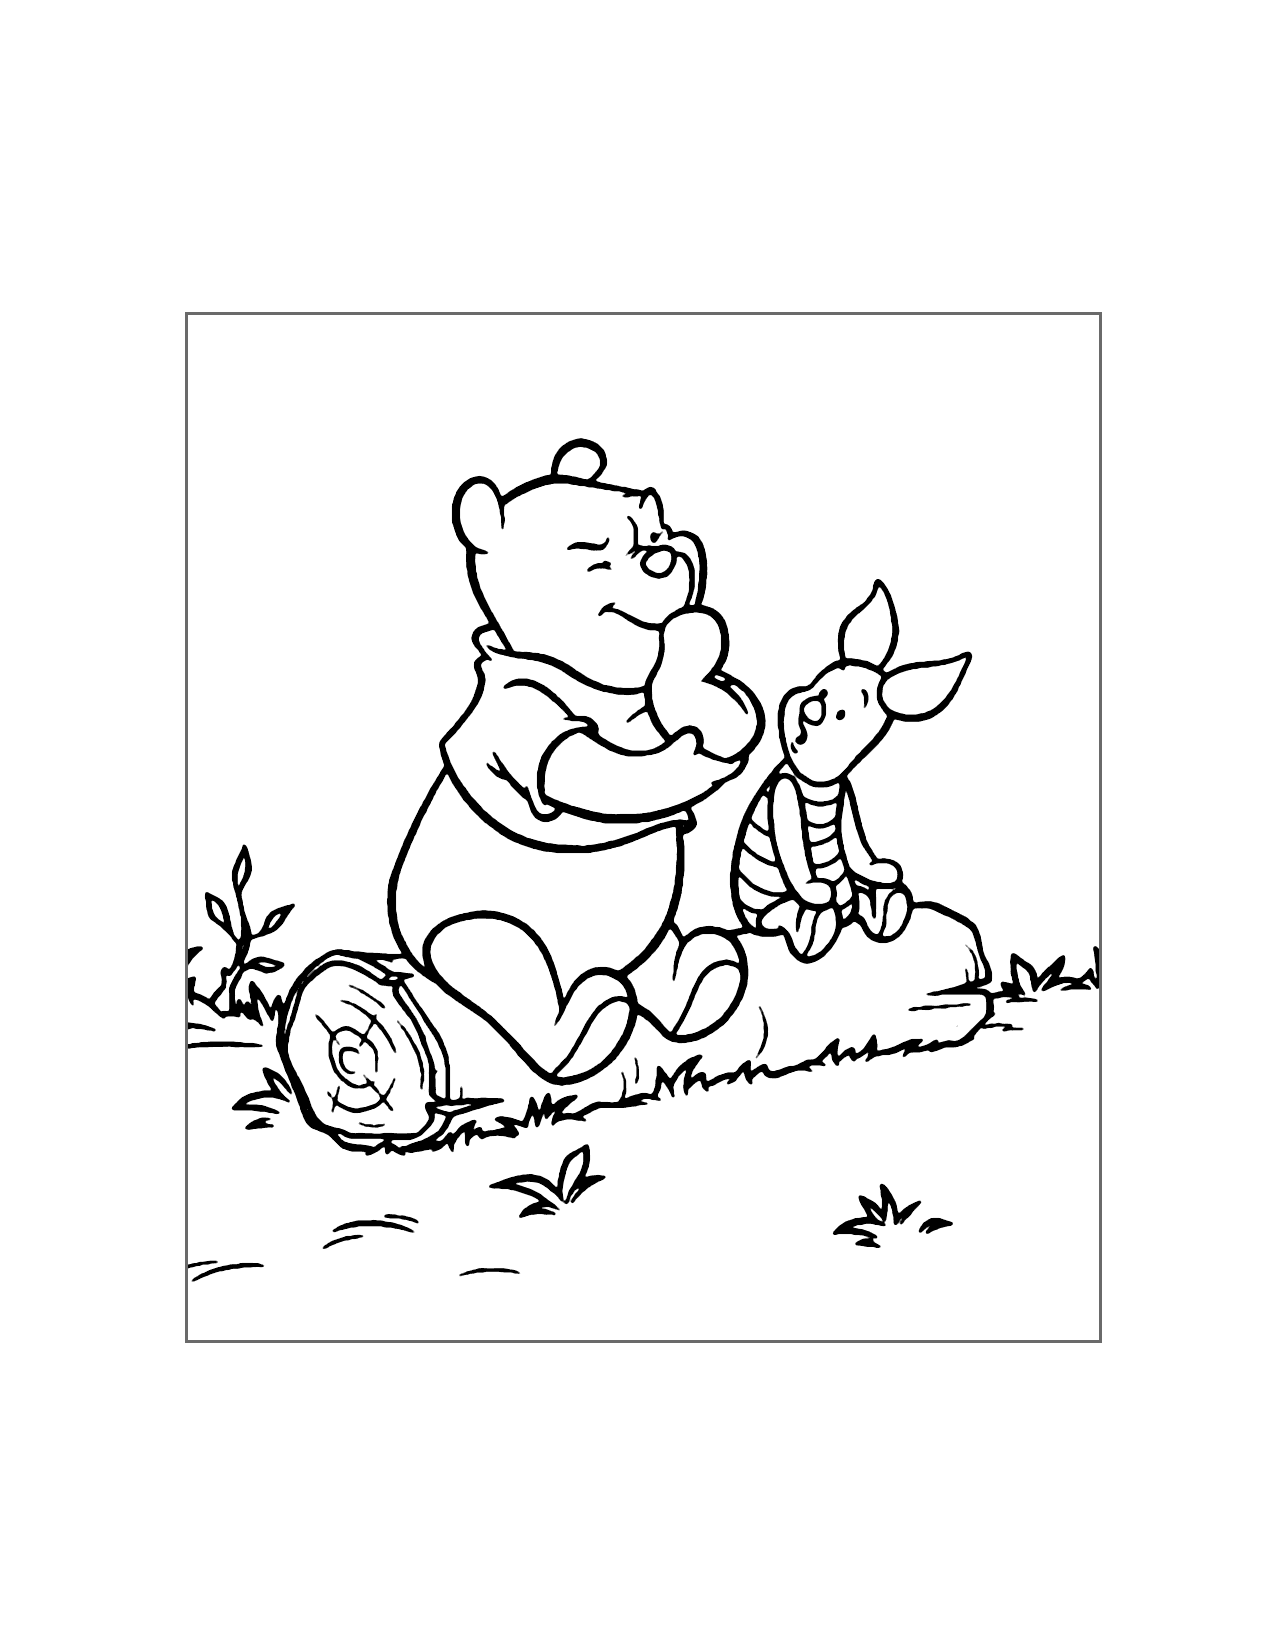 Piglet Helps Pooh Thing Coloring Page